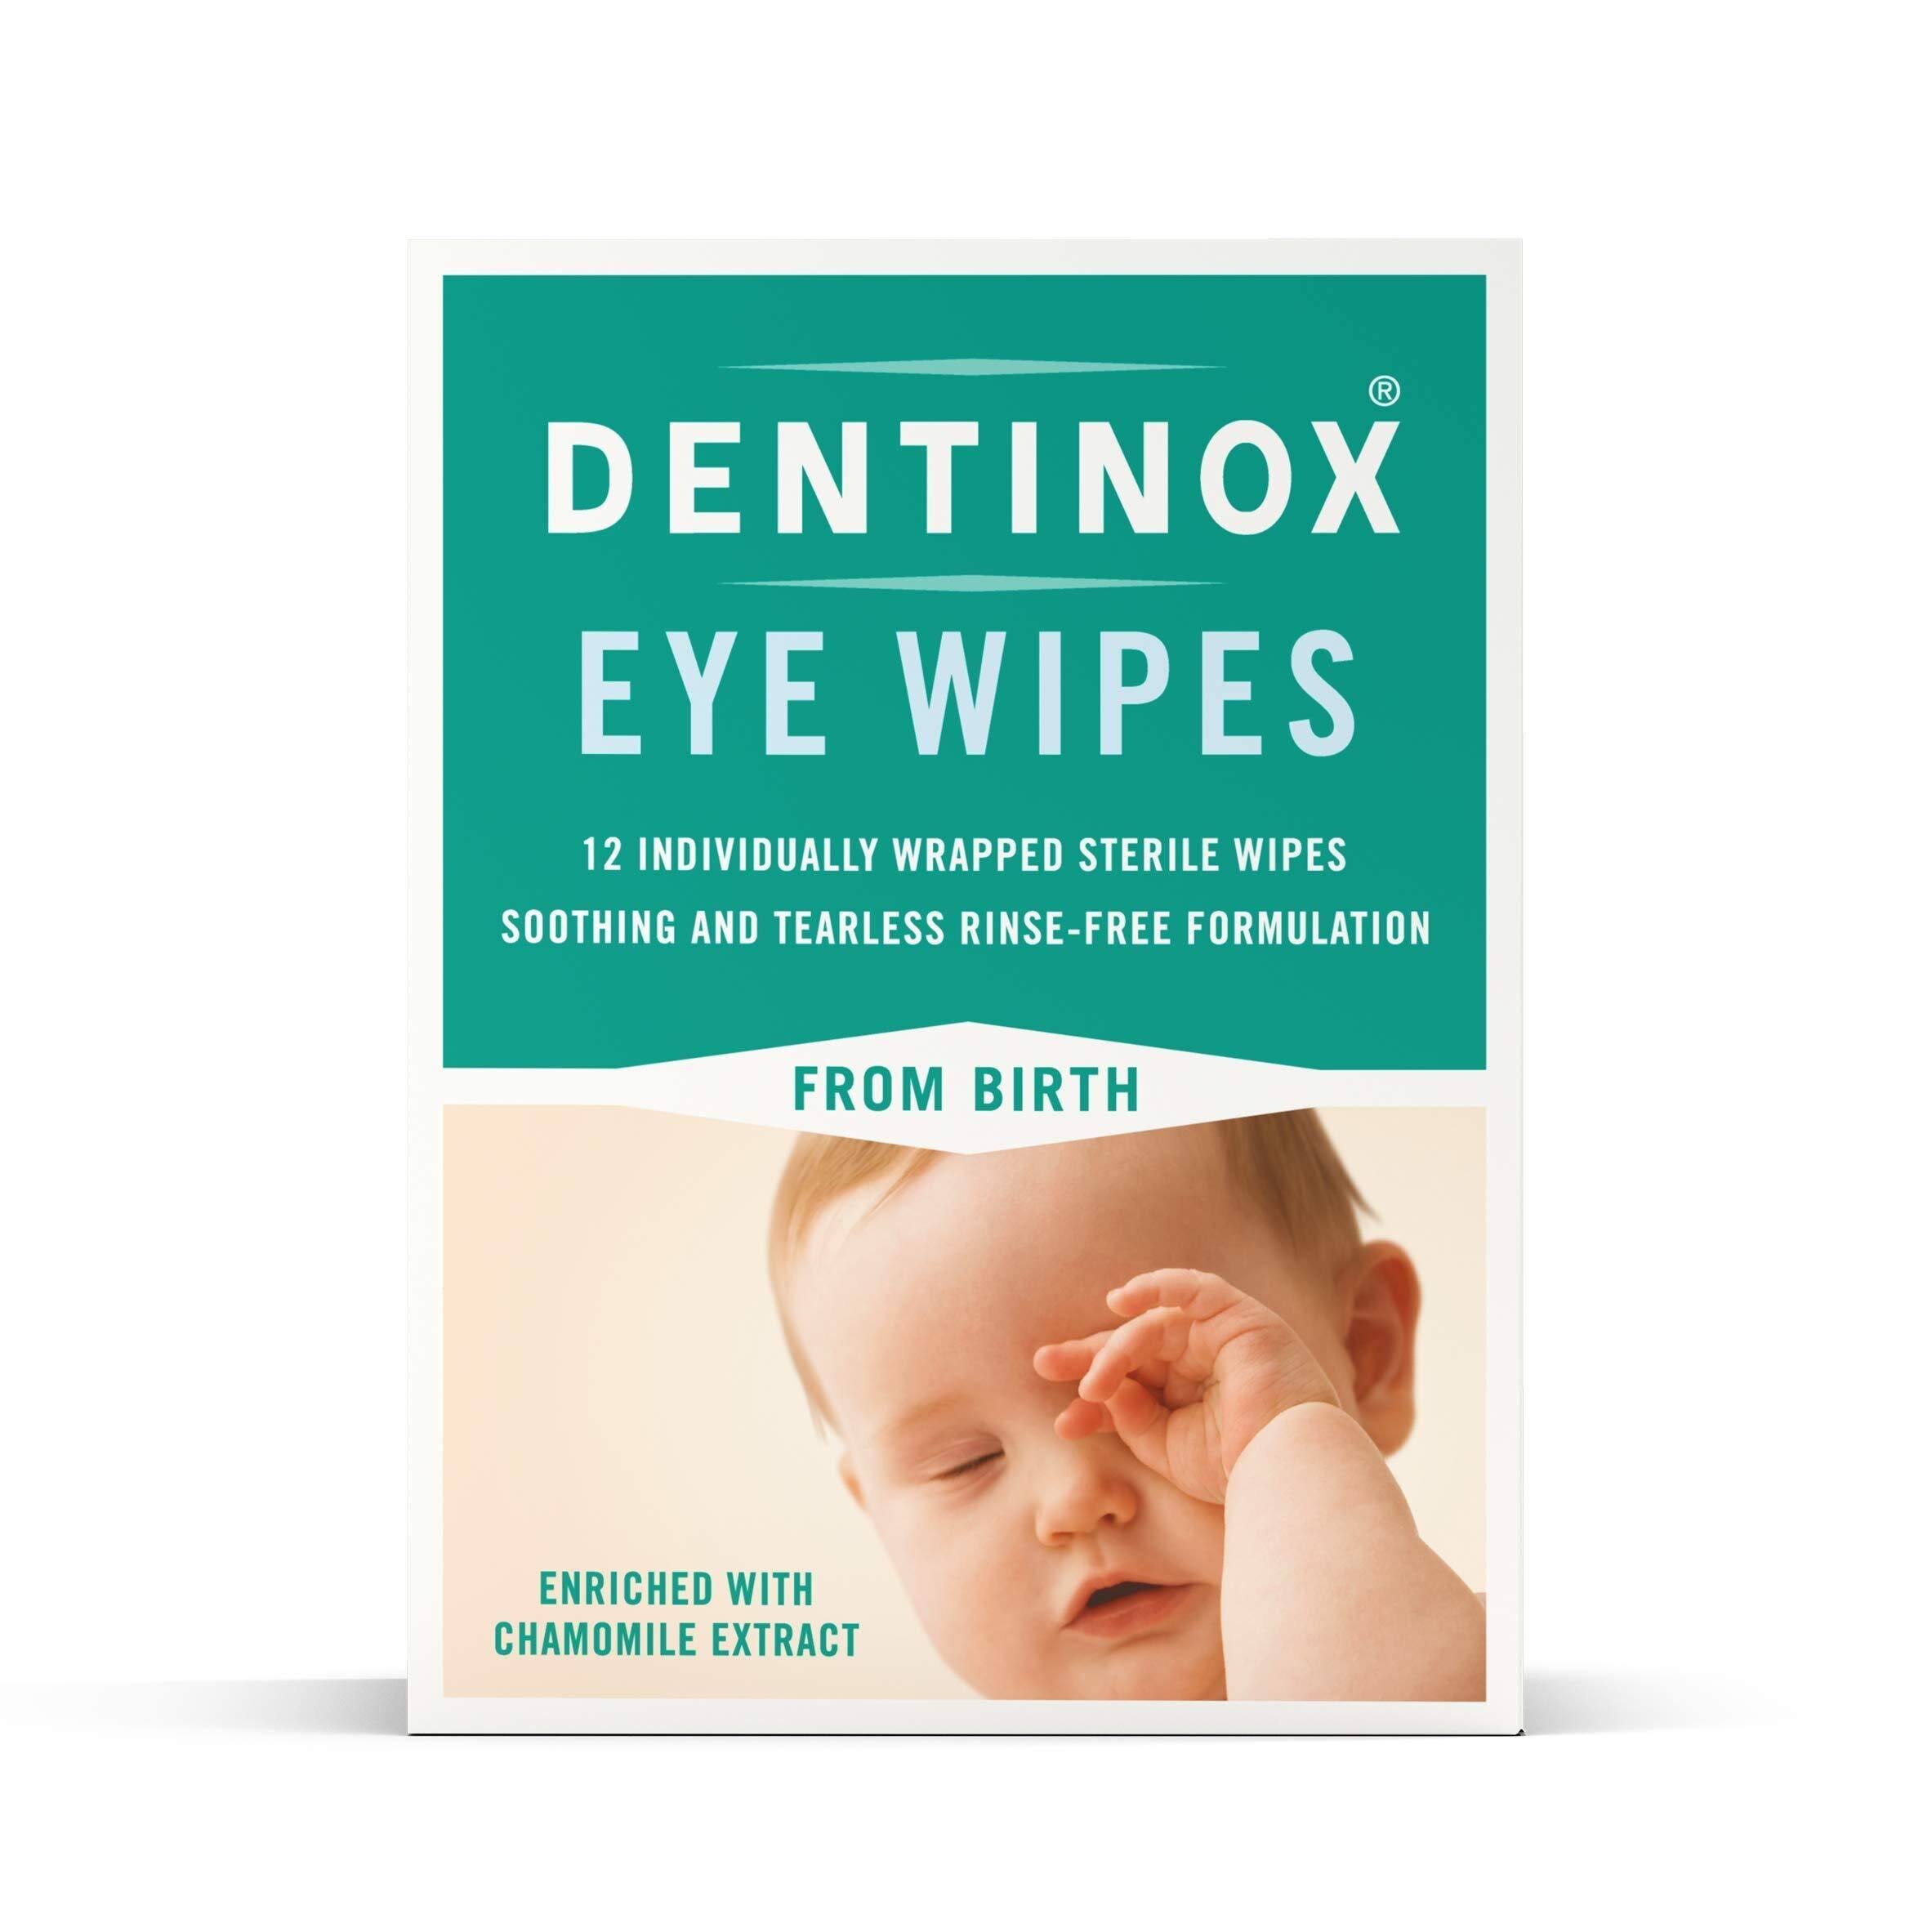 Dentinox Individually Wrapped Sterile Eye Wipes - 12 Sterile Wipes